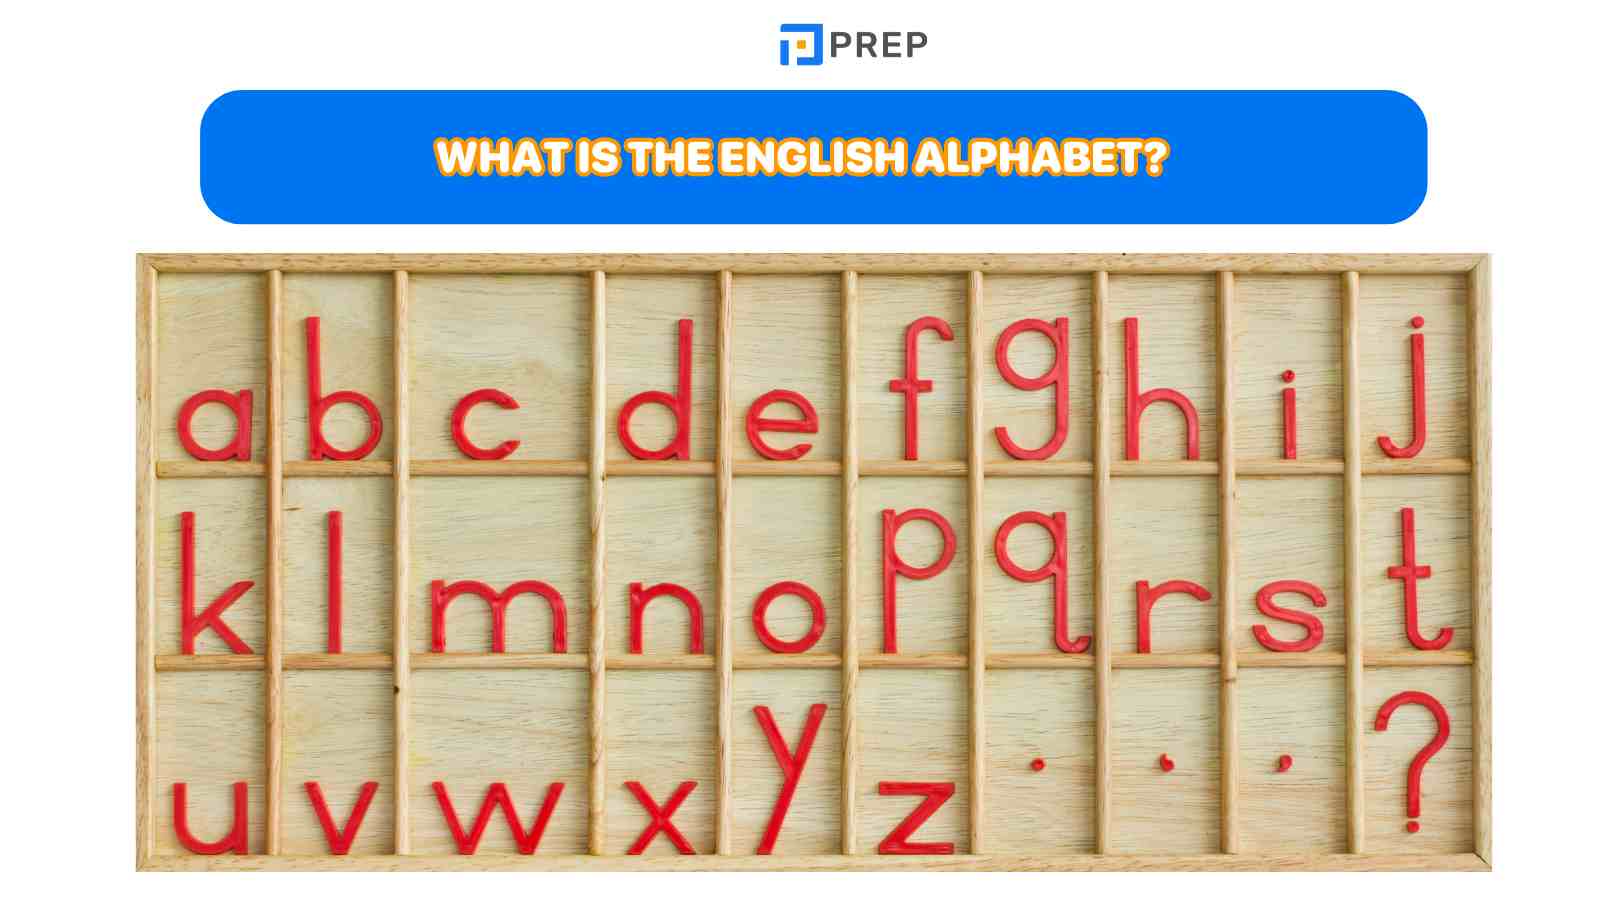 What is the English alphabet?